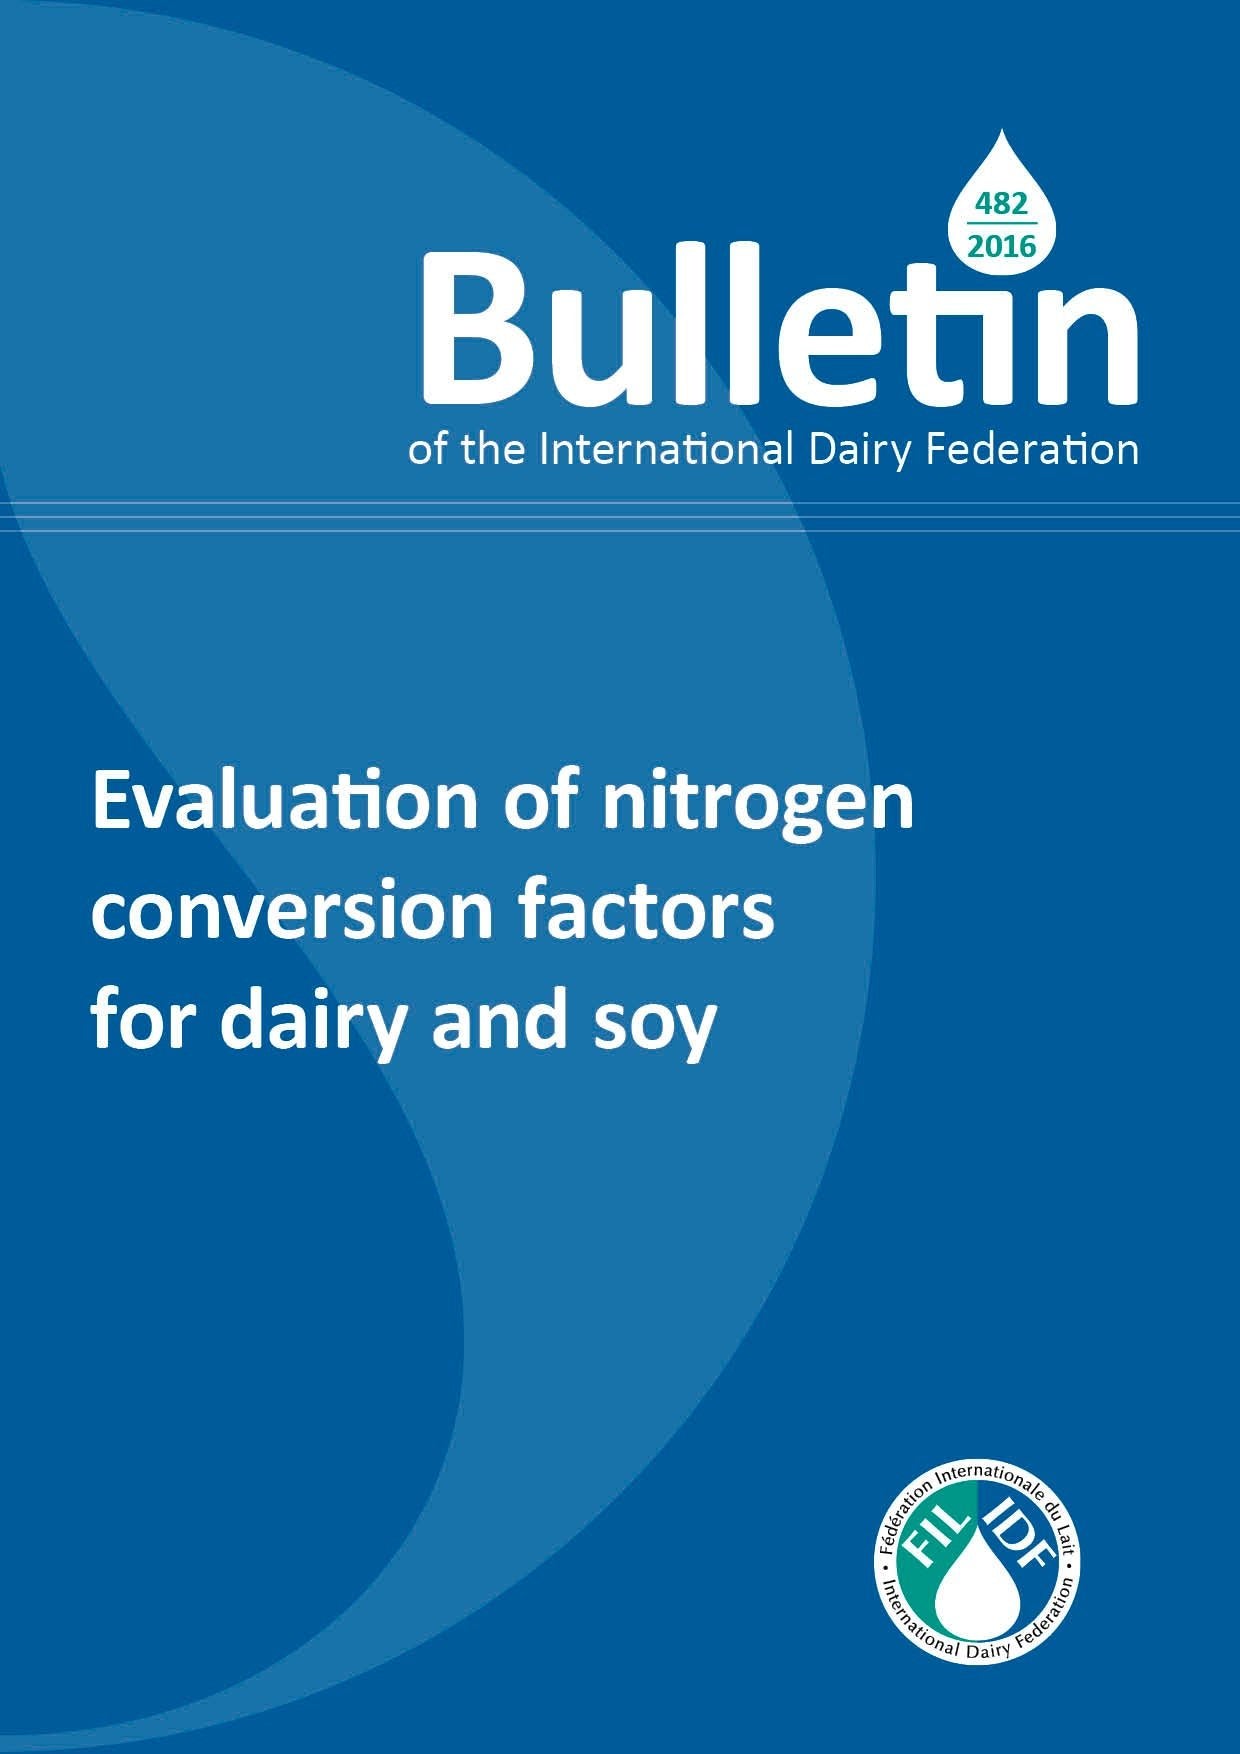 Bulletin of the IDF N° 482/ 2016: Evaluation of the Nitrogen conversion factors for dairy and soy - FIL-IDF